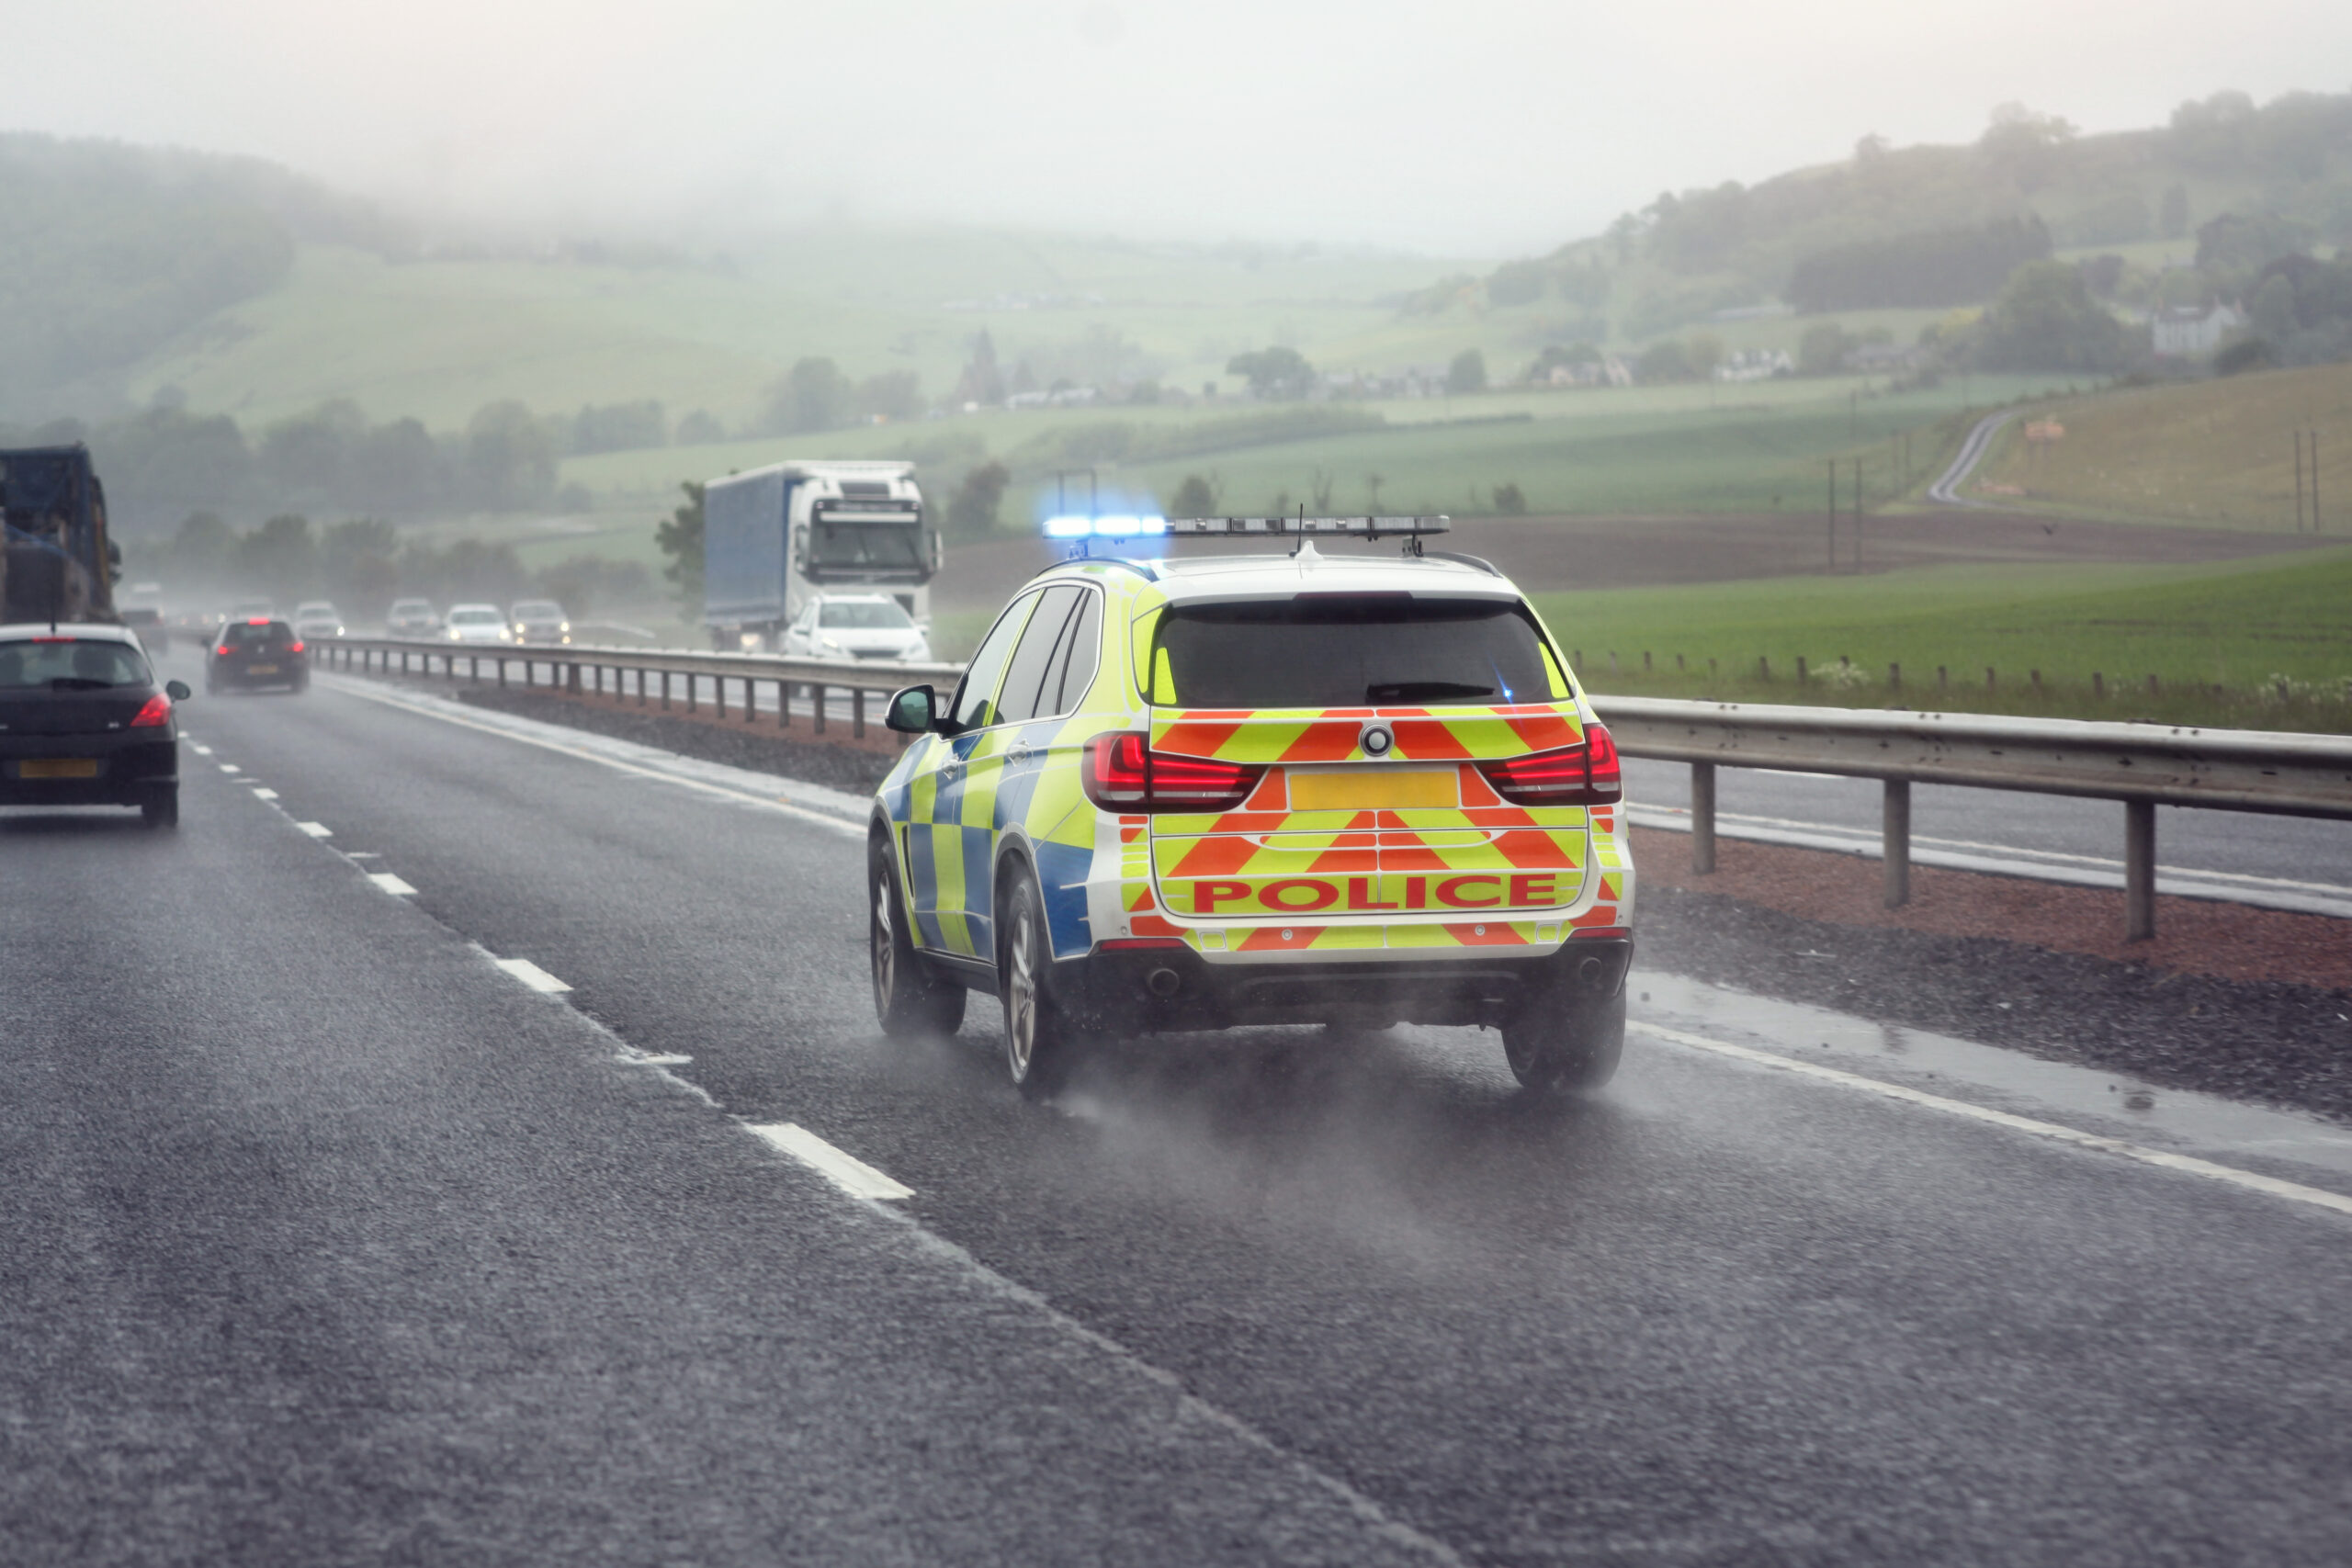 Police Scotland's Festive Crackdown on Driving under the Influence: All You Need to Know